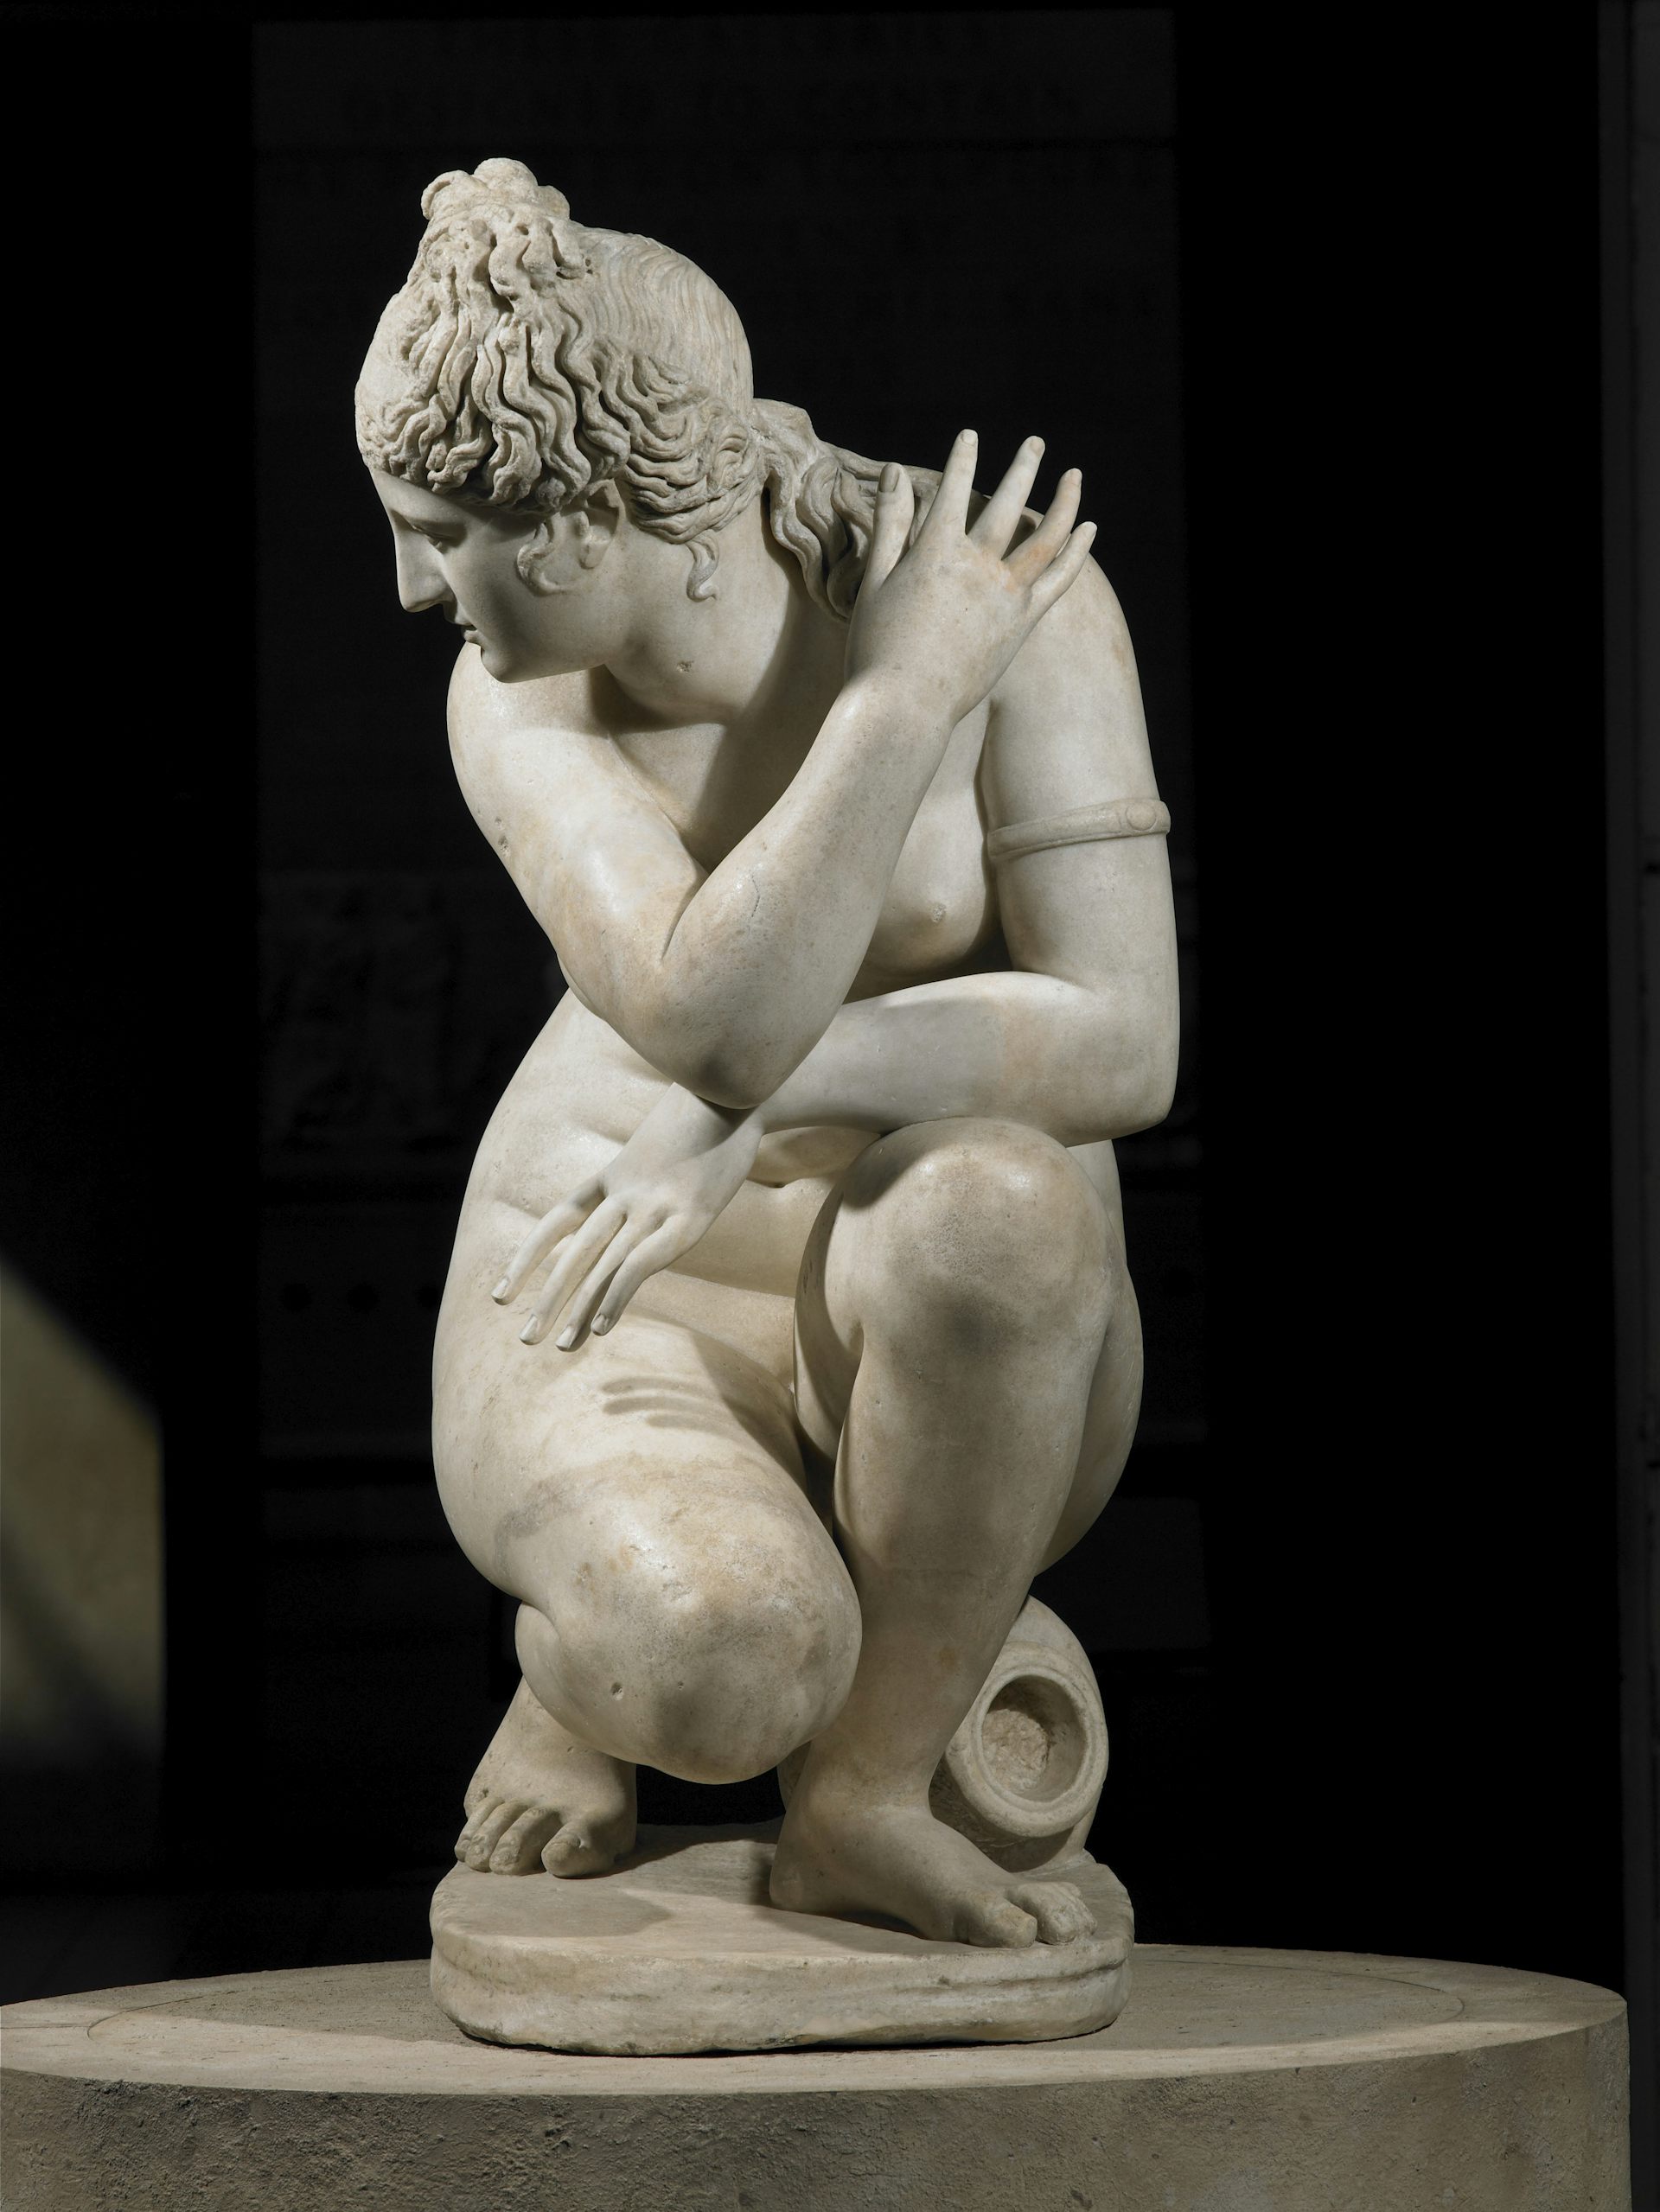 The truth about sex in ancient Greece